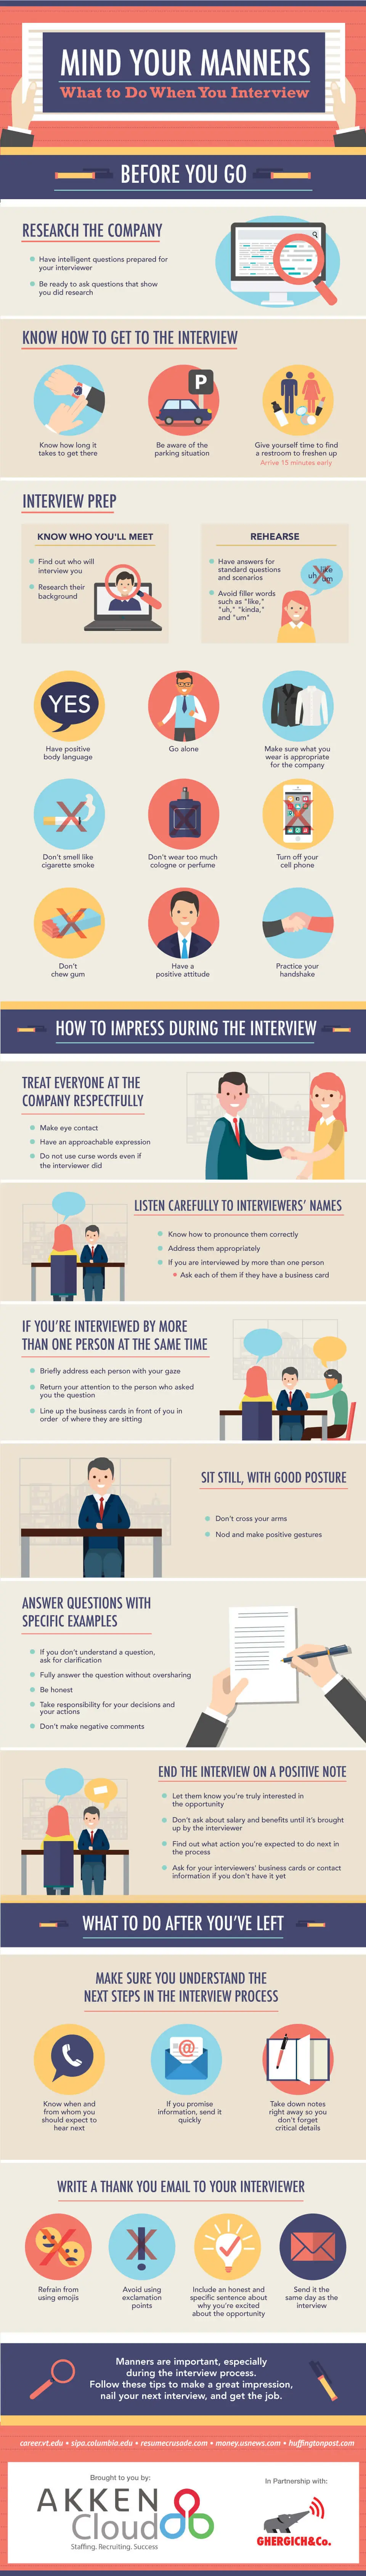 job-interview-infographic-tips